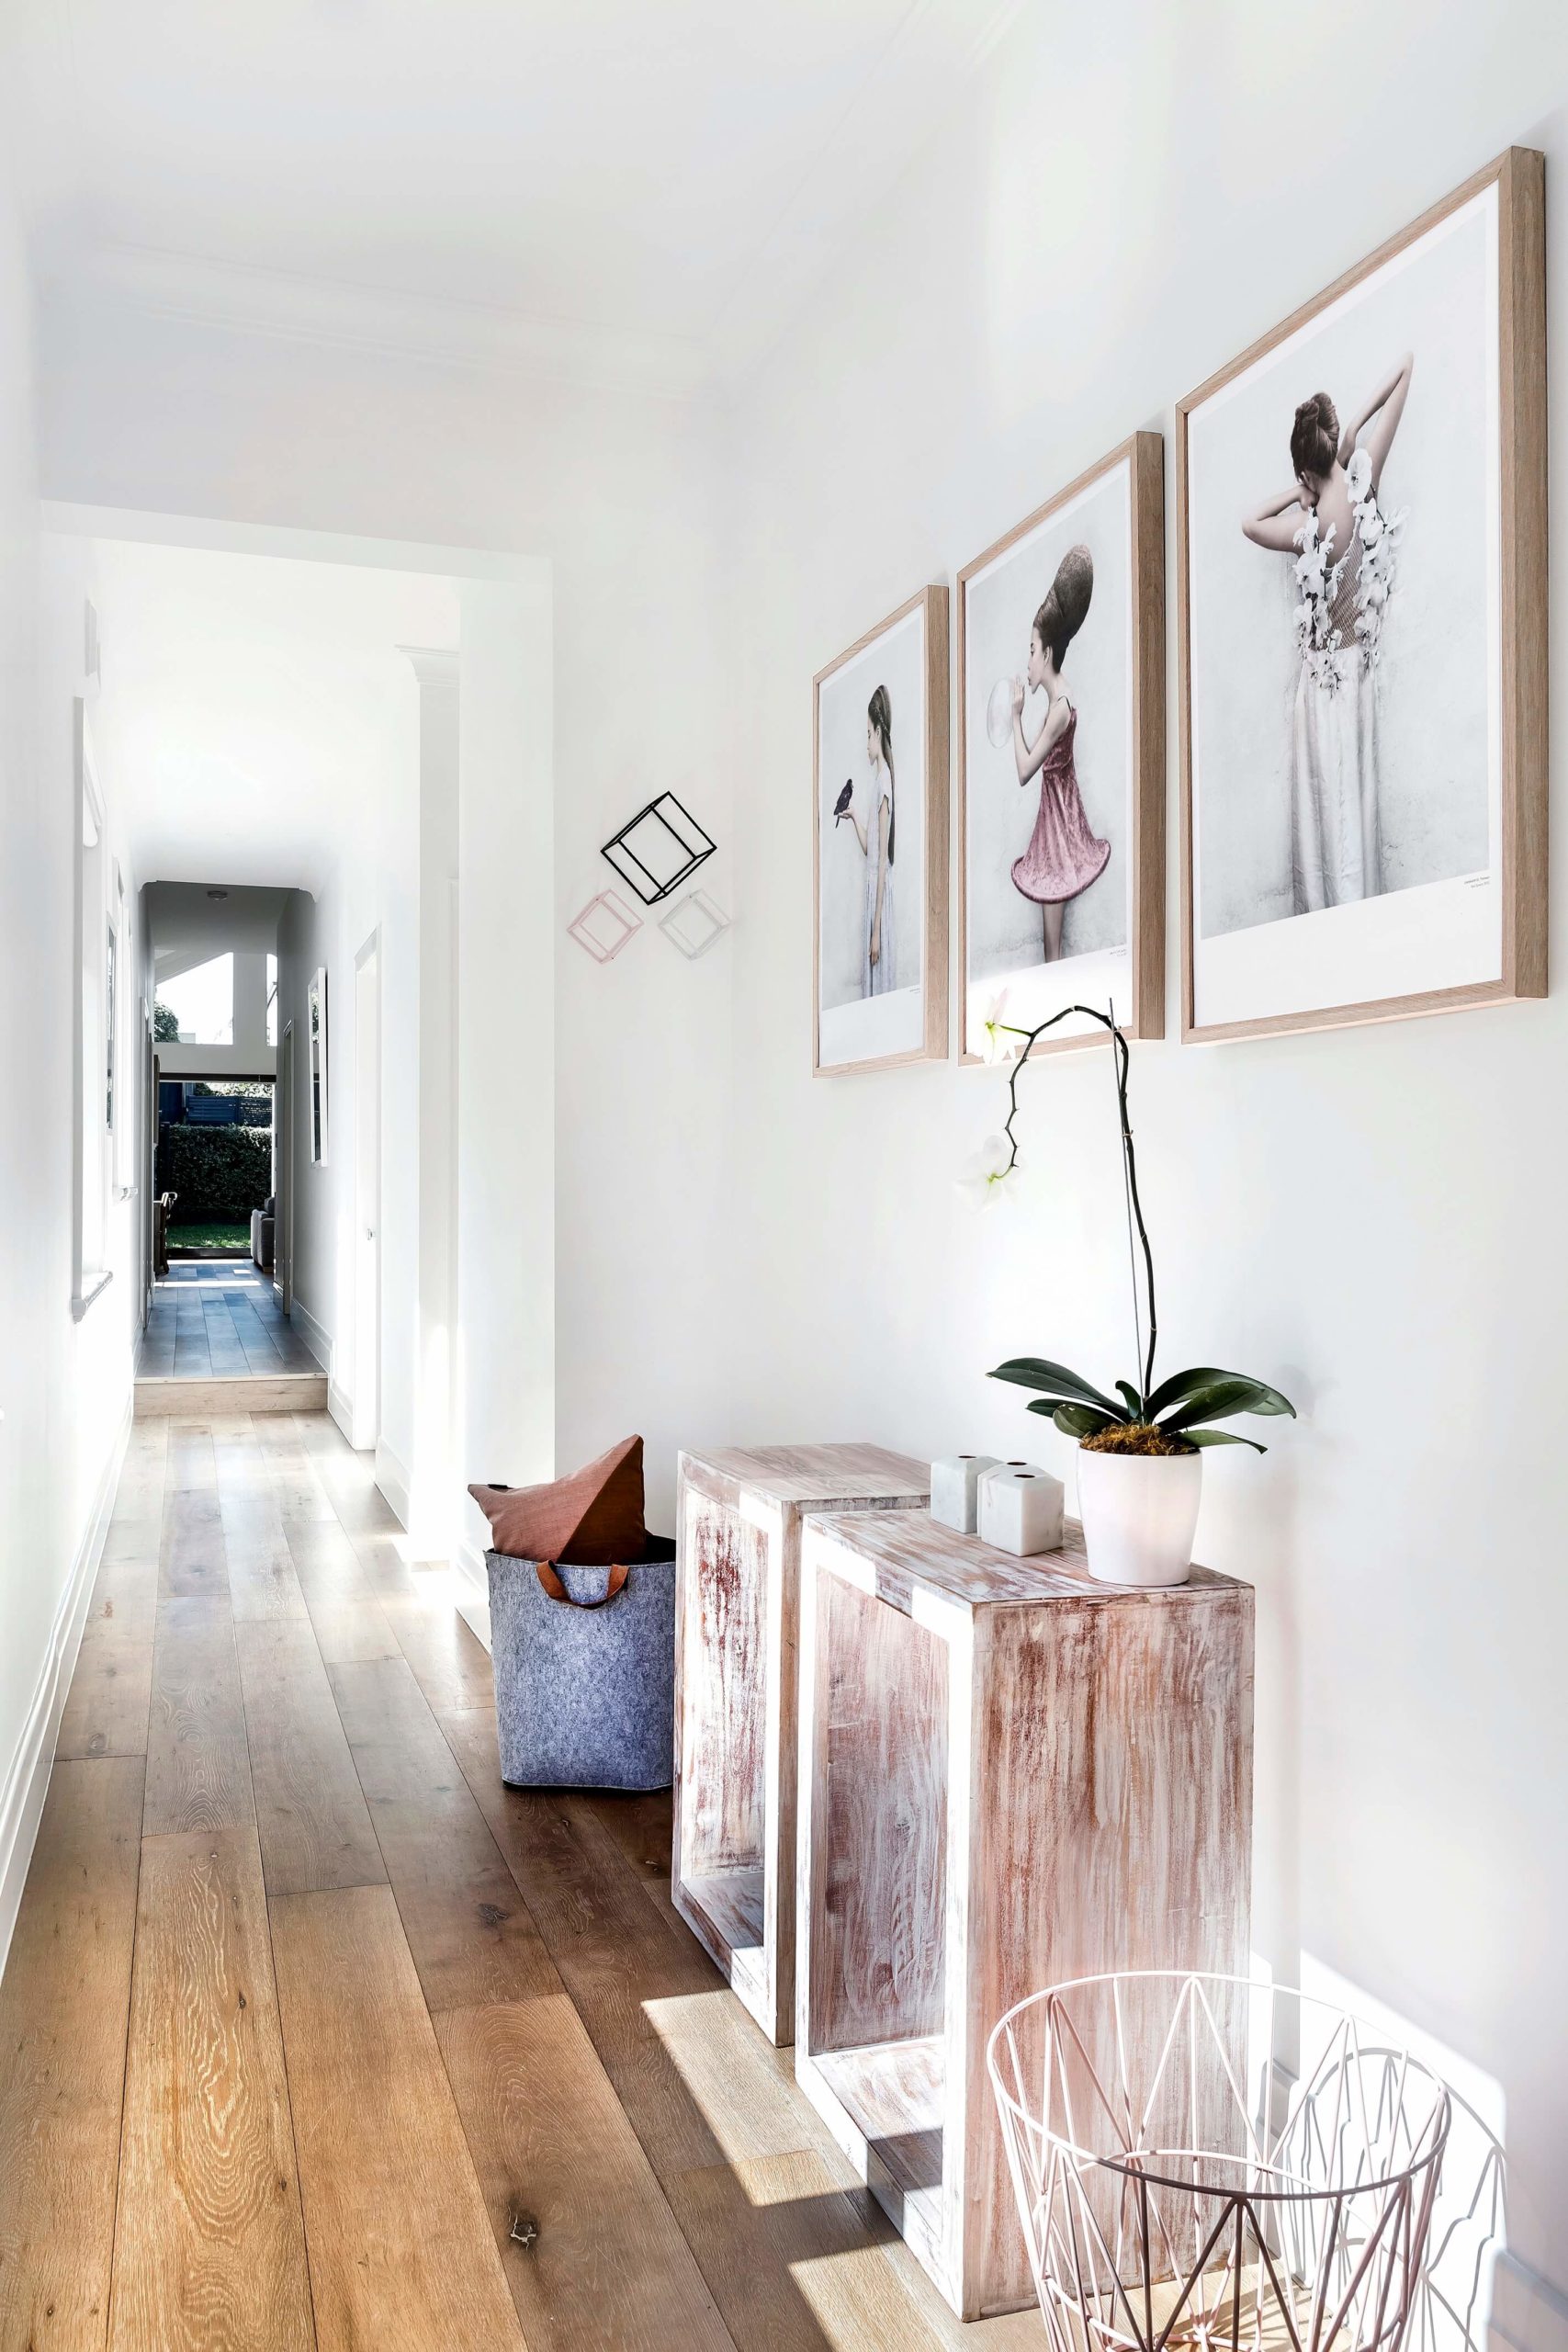 A Long Narrow Hallway - Help for a Dark Scary Mess - Laurel Home